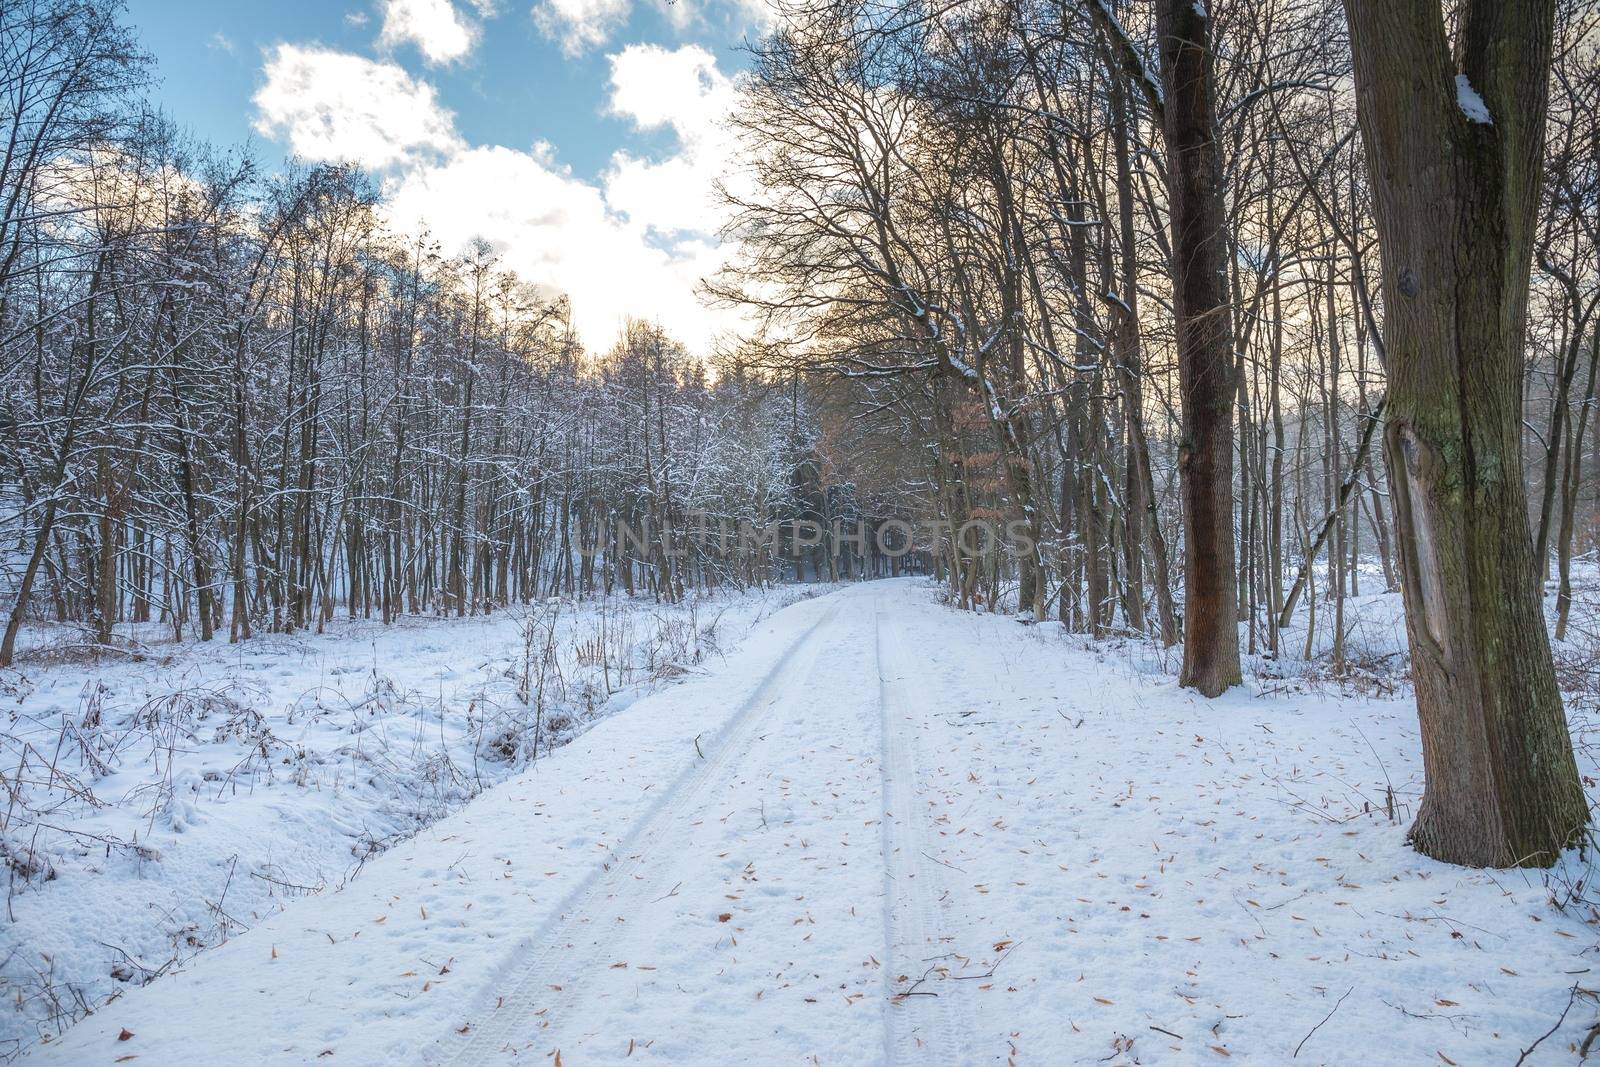 Snow covered path in a wooded winter landscape, snow falling from trees, footprints in the snow